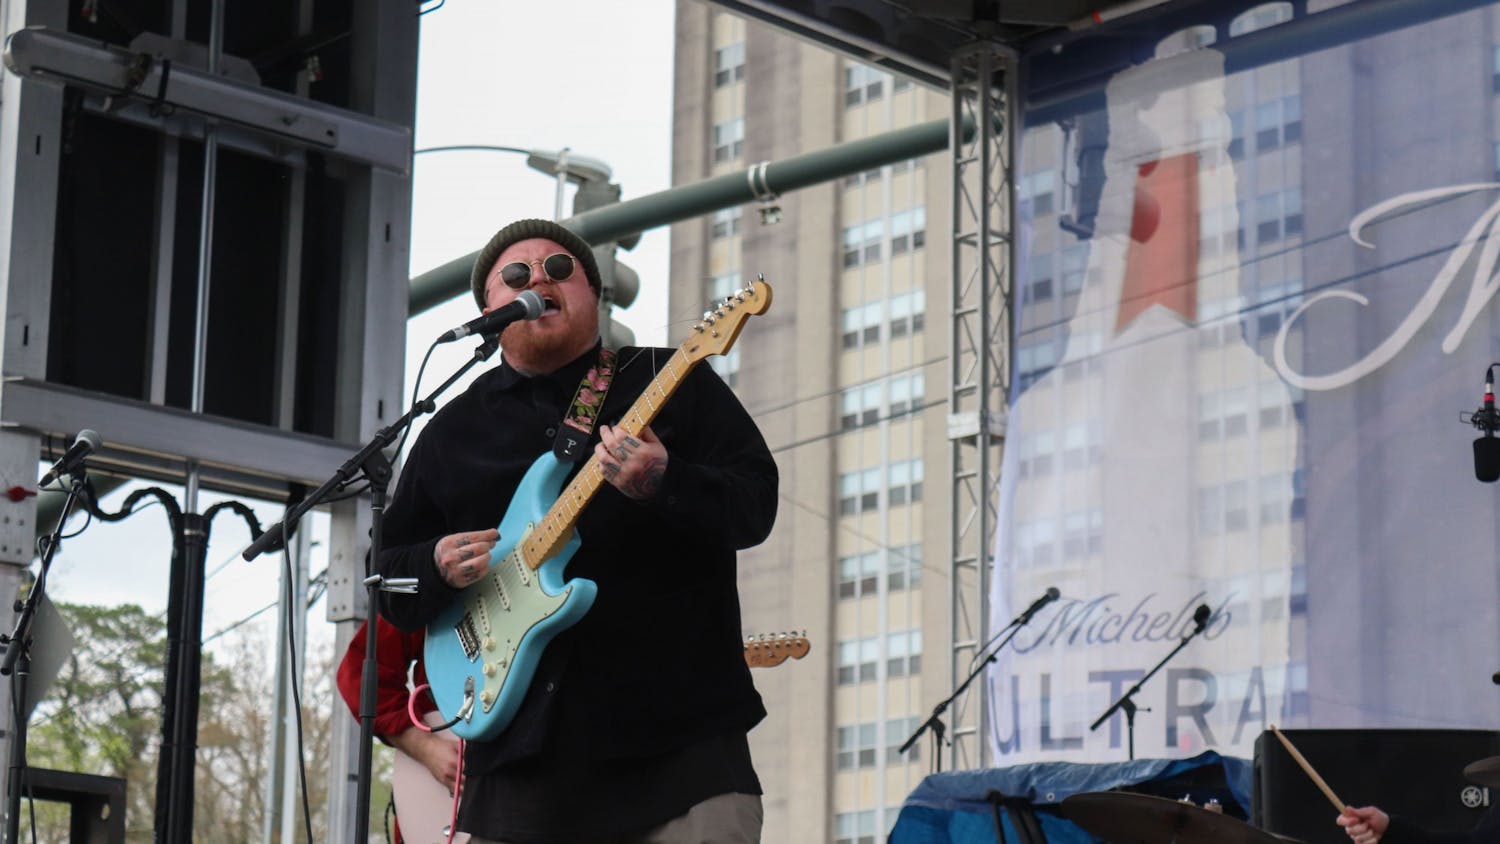 The singer of The Lottery Winners, a British band, performs at the 40th Annual St. Pats in 5 Points.